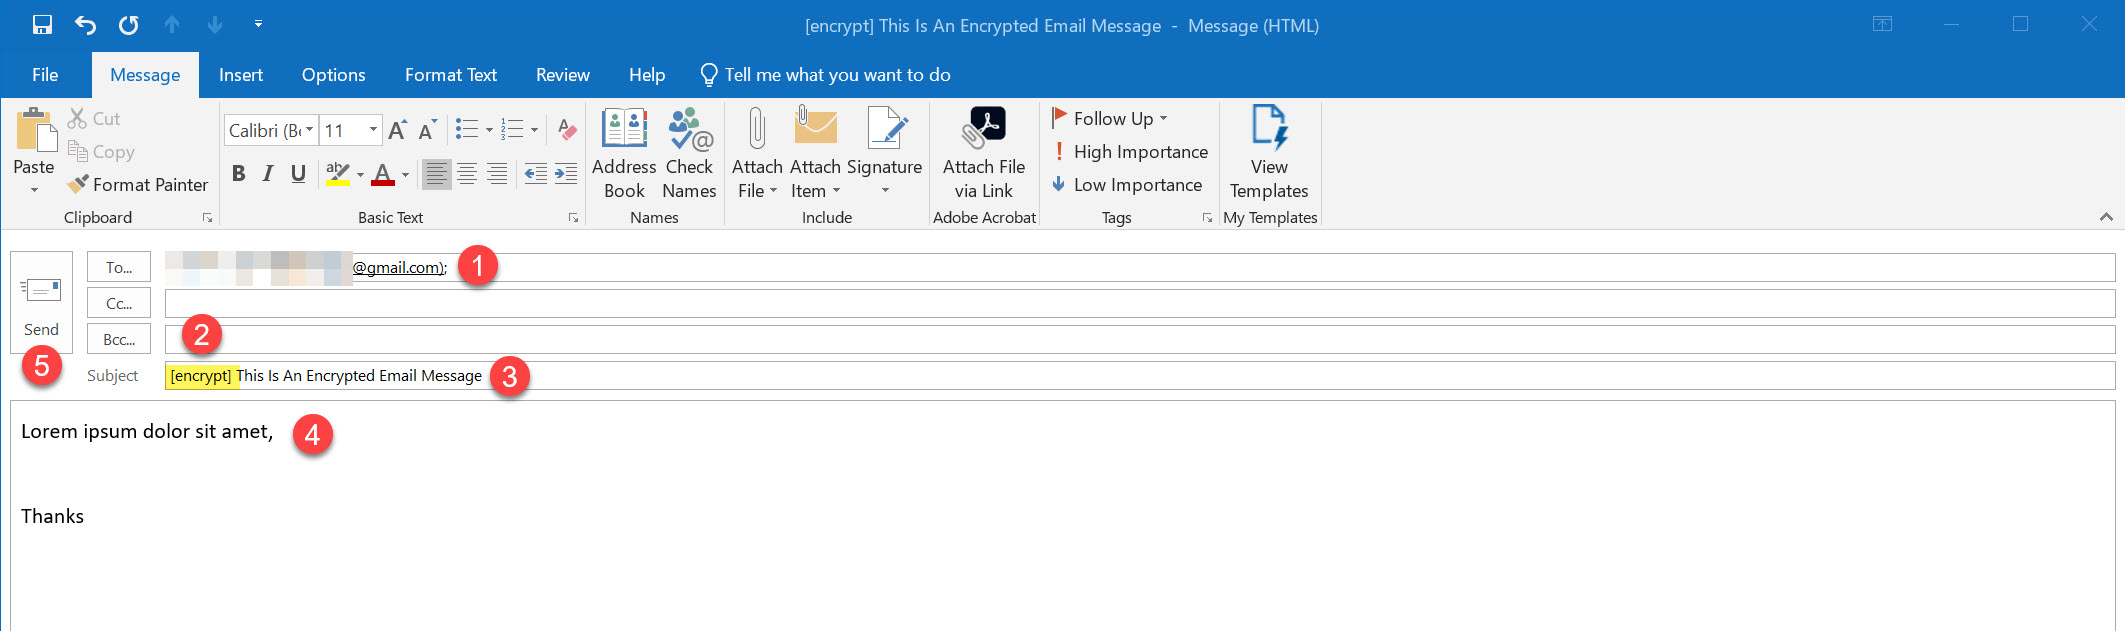 Steps explaining how to write an encrypted email - begin the subject line with the phrase [encrypt] - including the brackets.